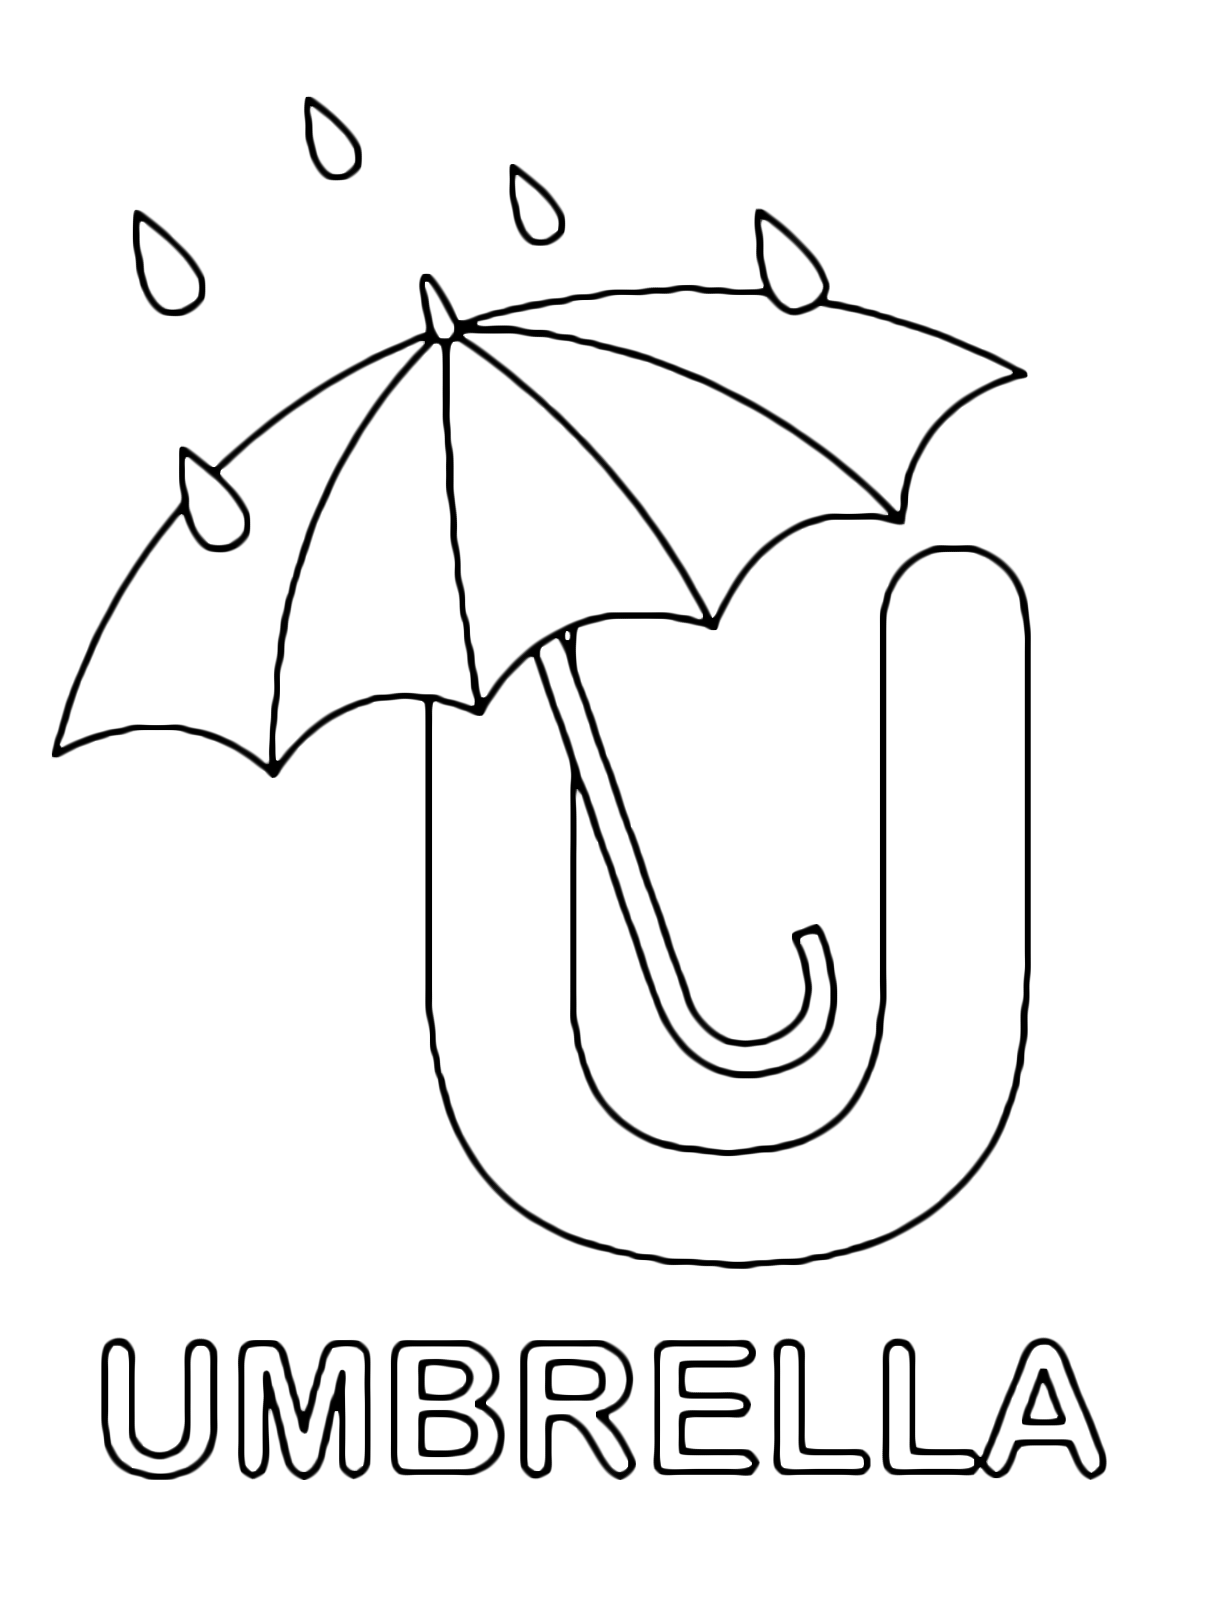 Letters and numbers - U for ubrella uppercase letter